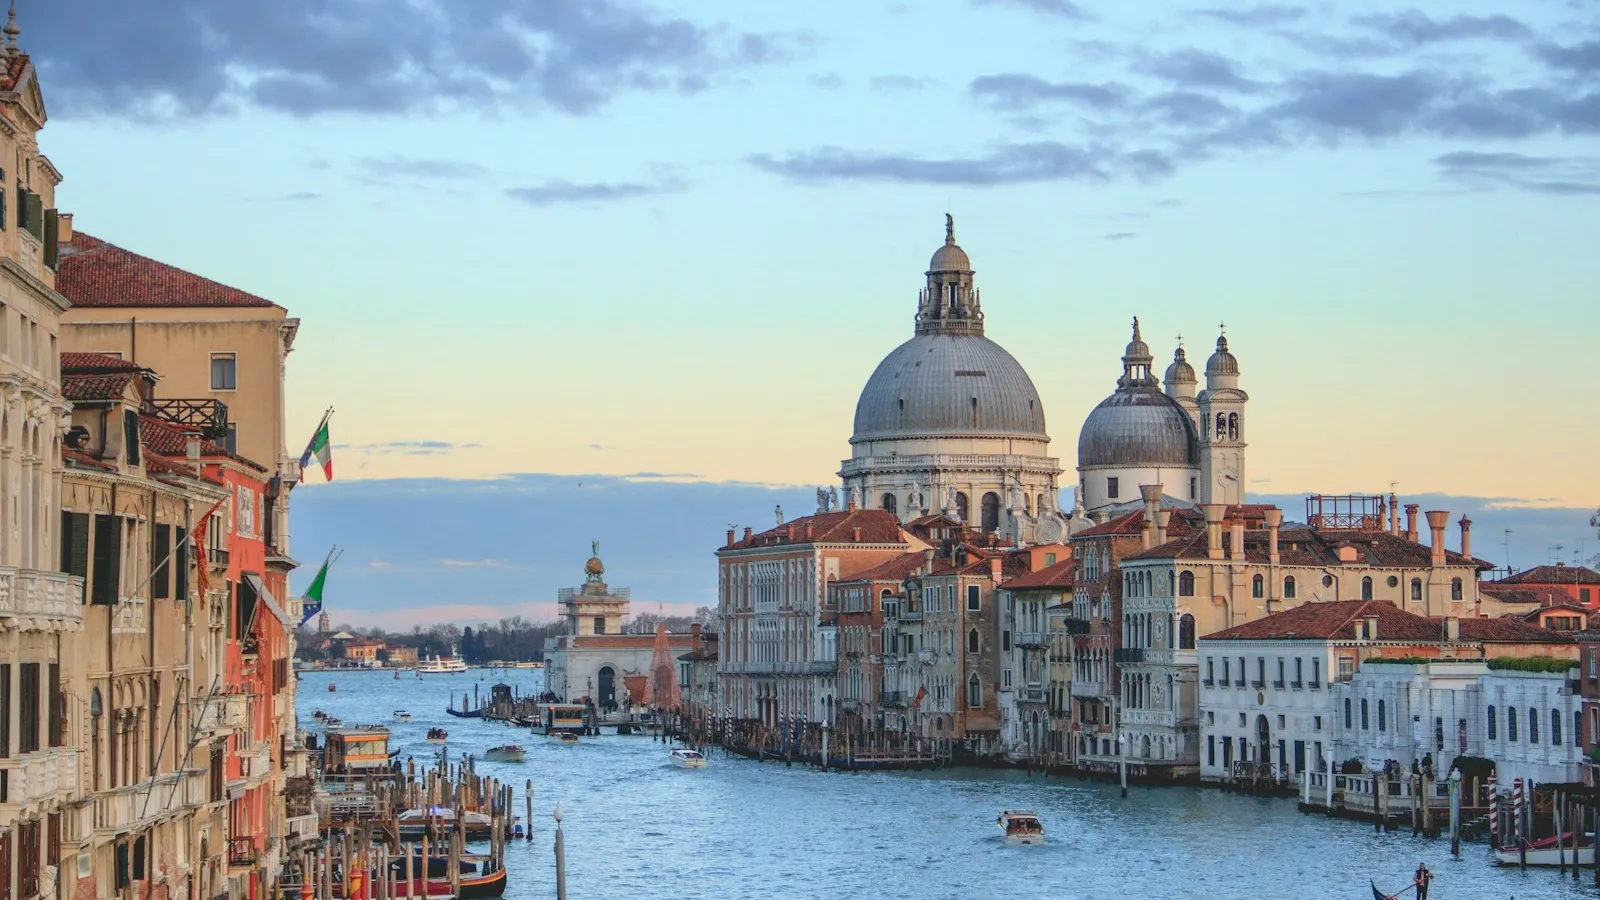 Venice is one of the top tourist destinations, but you should watch out for common scam. Learn how to identify, and avoid scams in Venice.